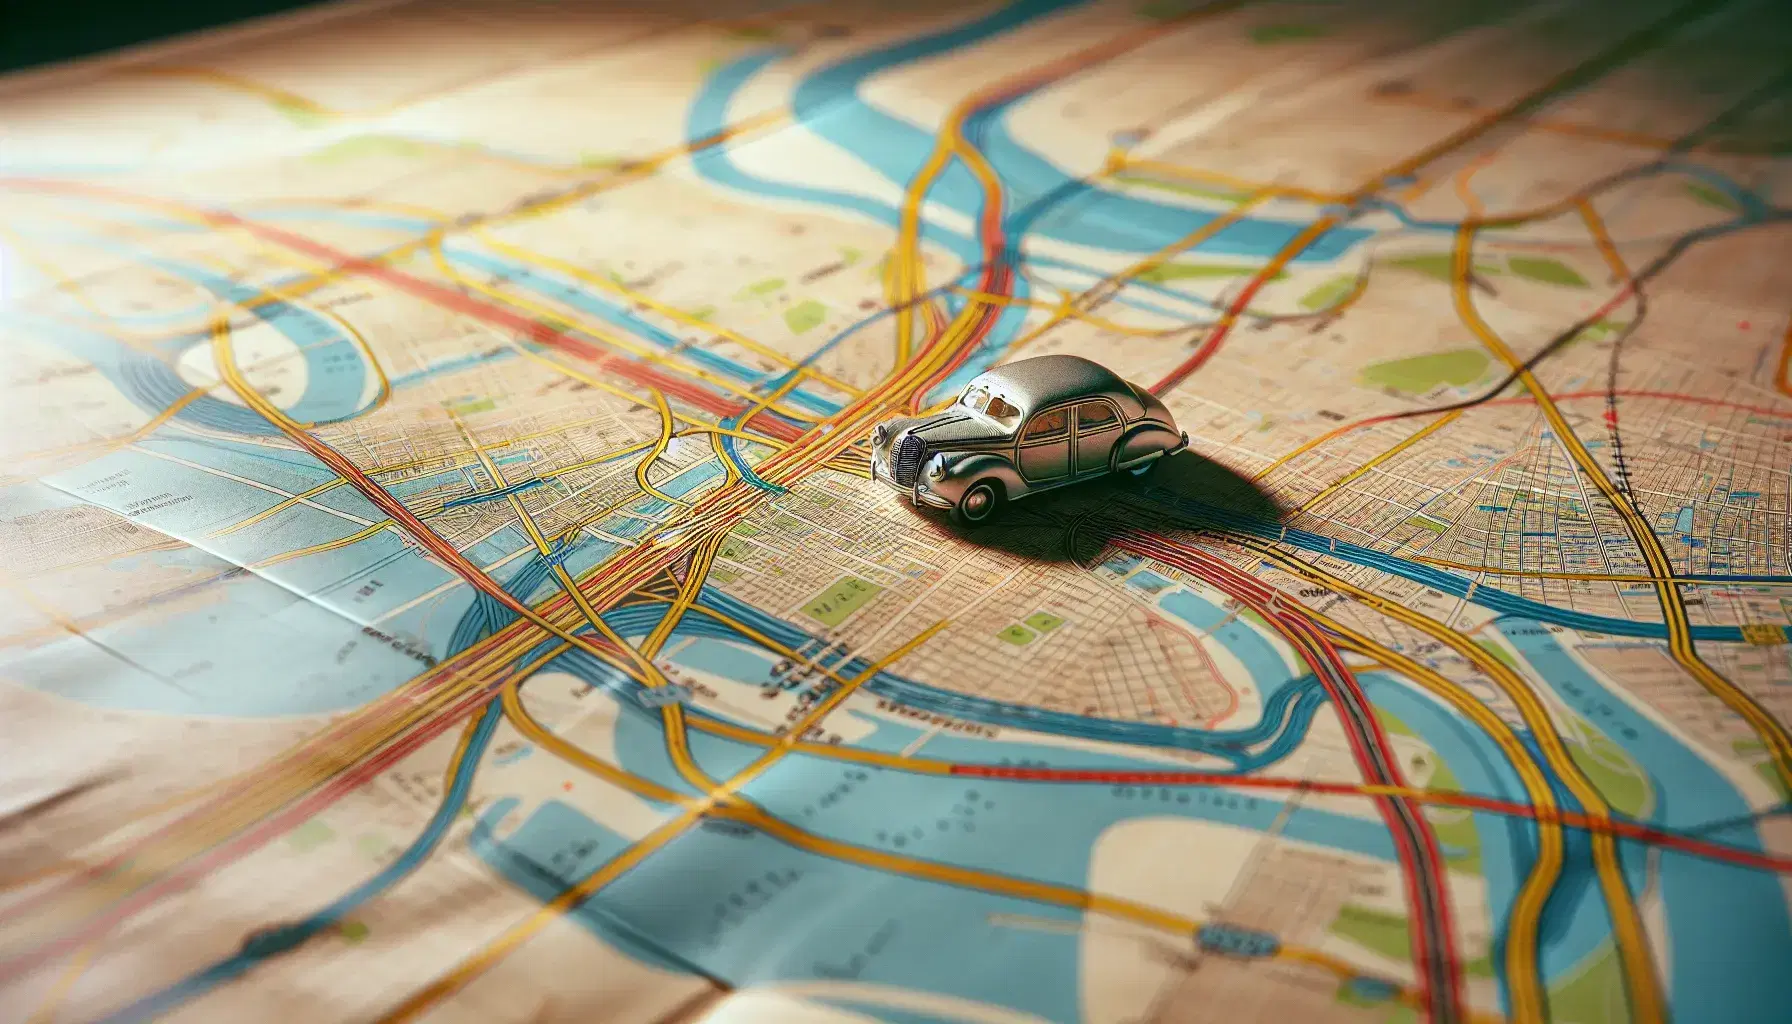 Partially open detailed road map with colorful lines on the streets and silver toy car on blue highway, no text visible.